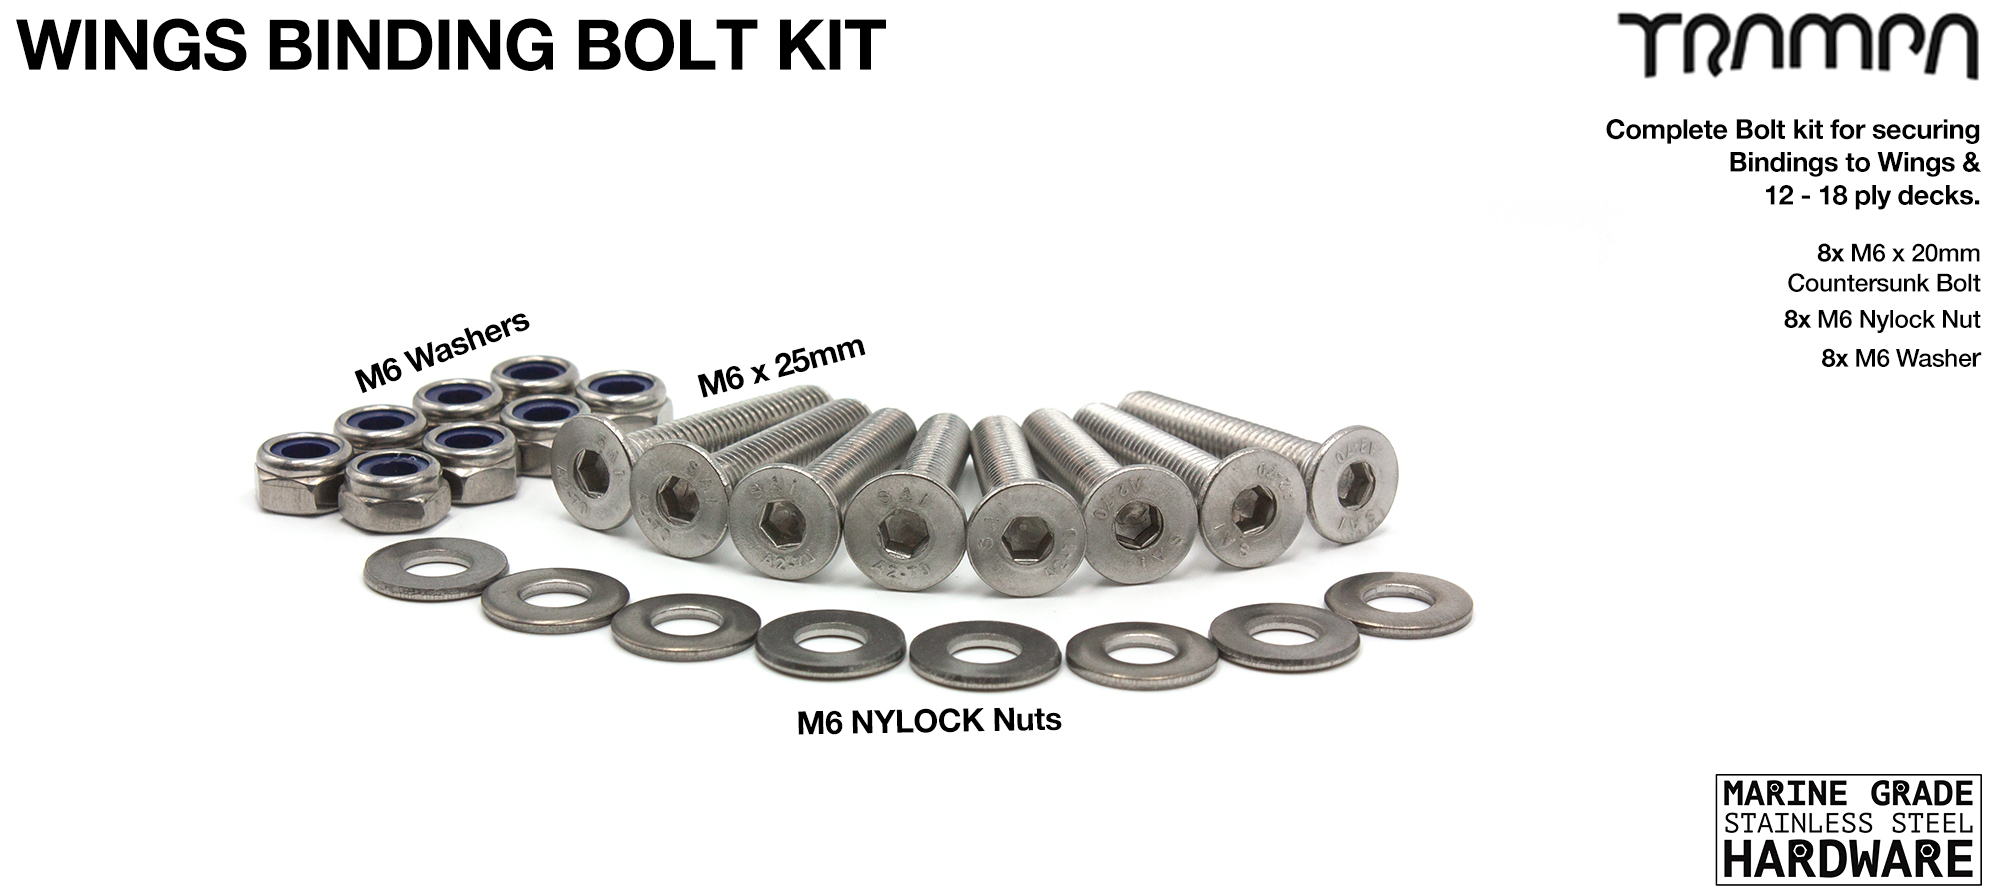 Bindings Bolt Kit M6x35mm to fit with the WINGS M6 Marine Grade Stainless Steel Countersunk Binding Bolt Kit to fit the WINGS